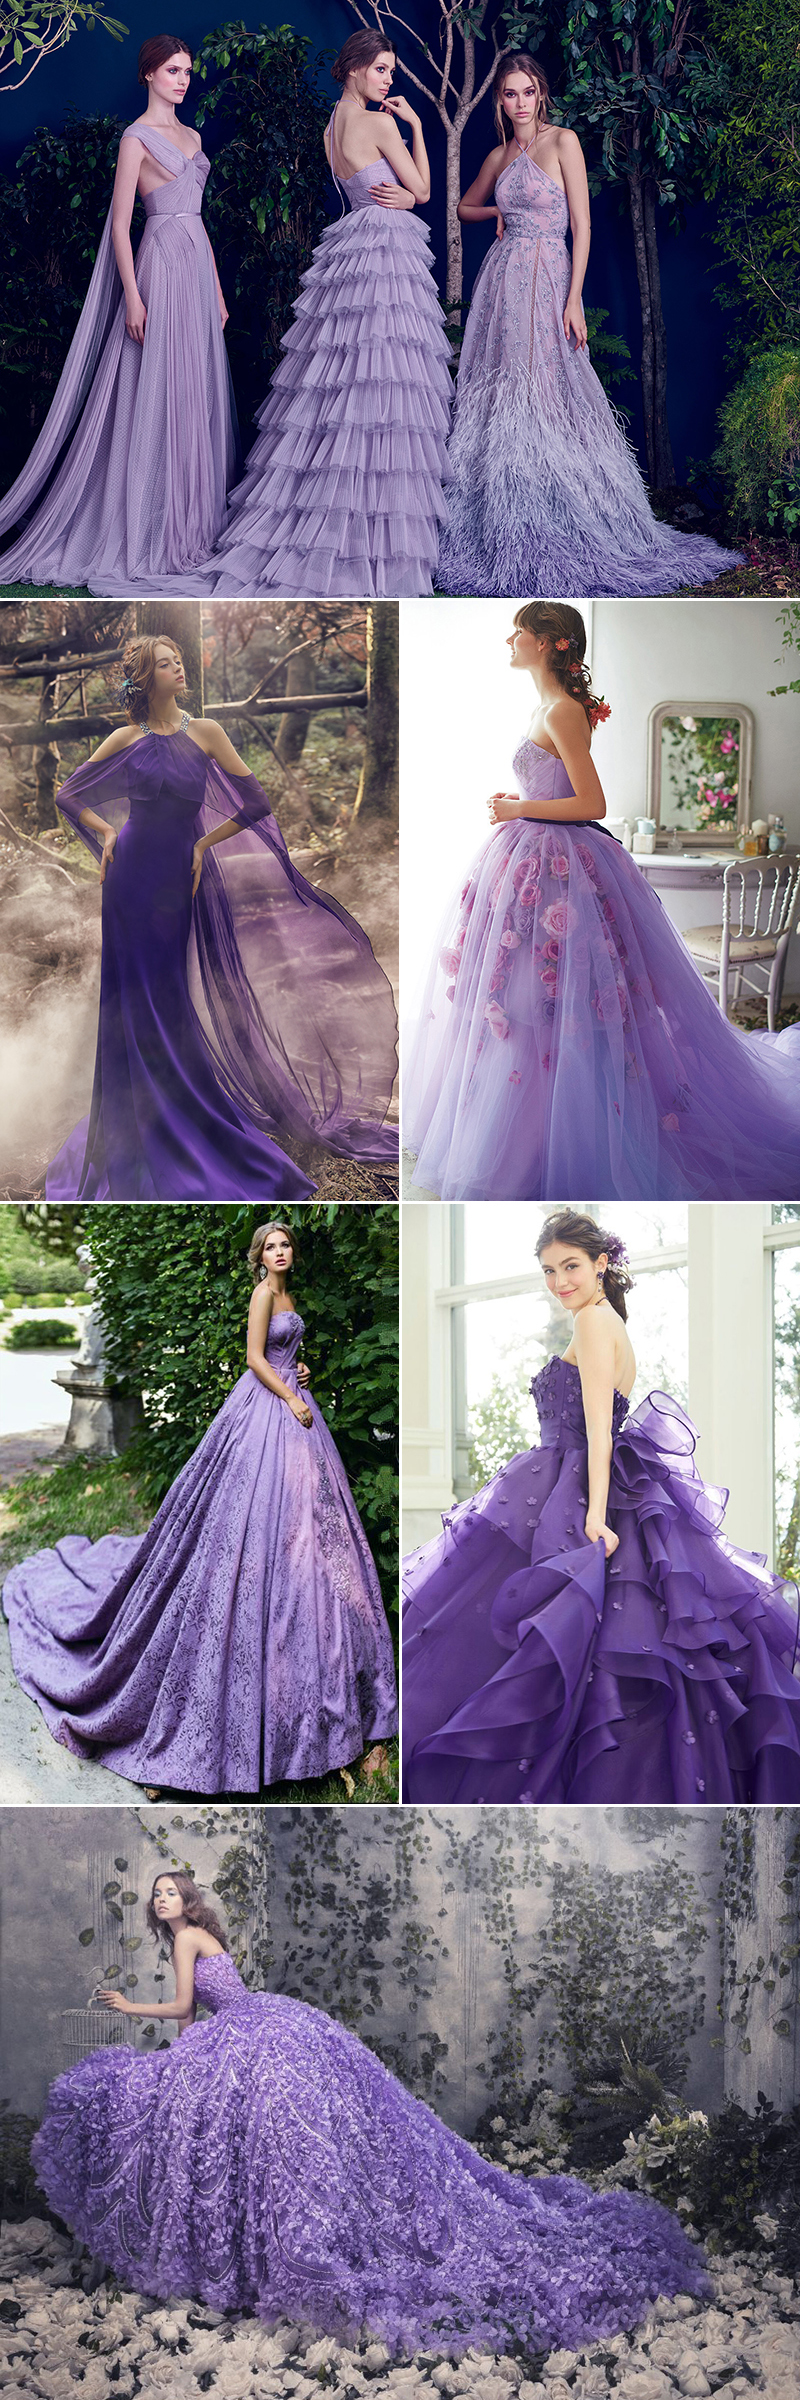 dresses with purple in them